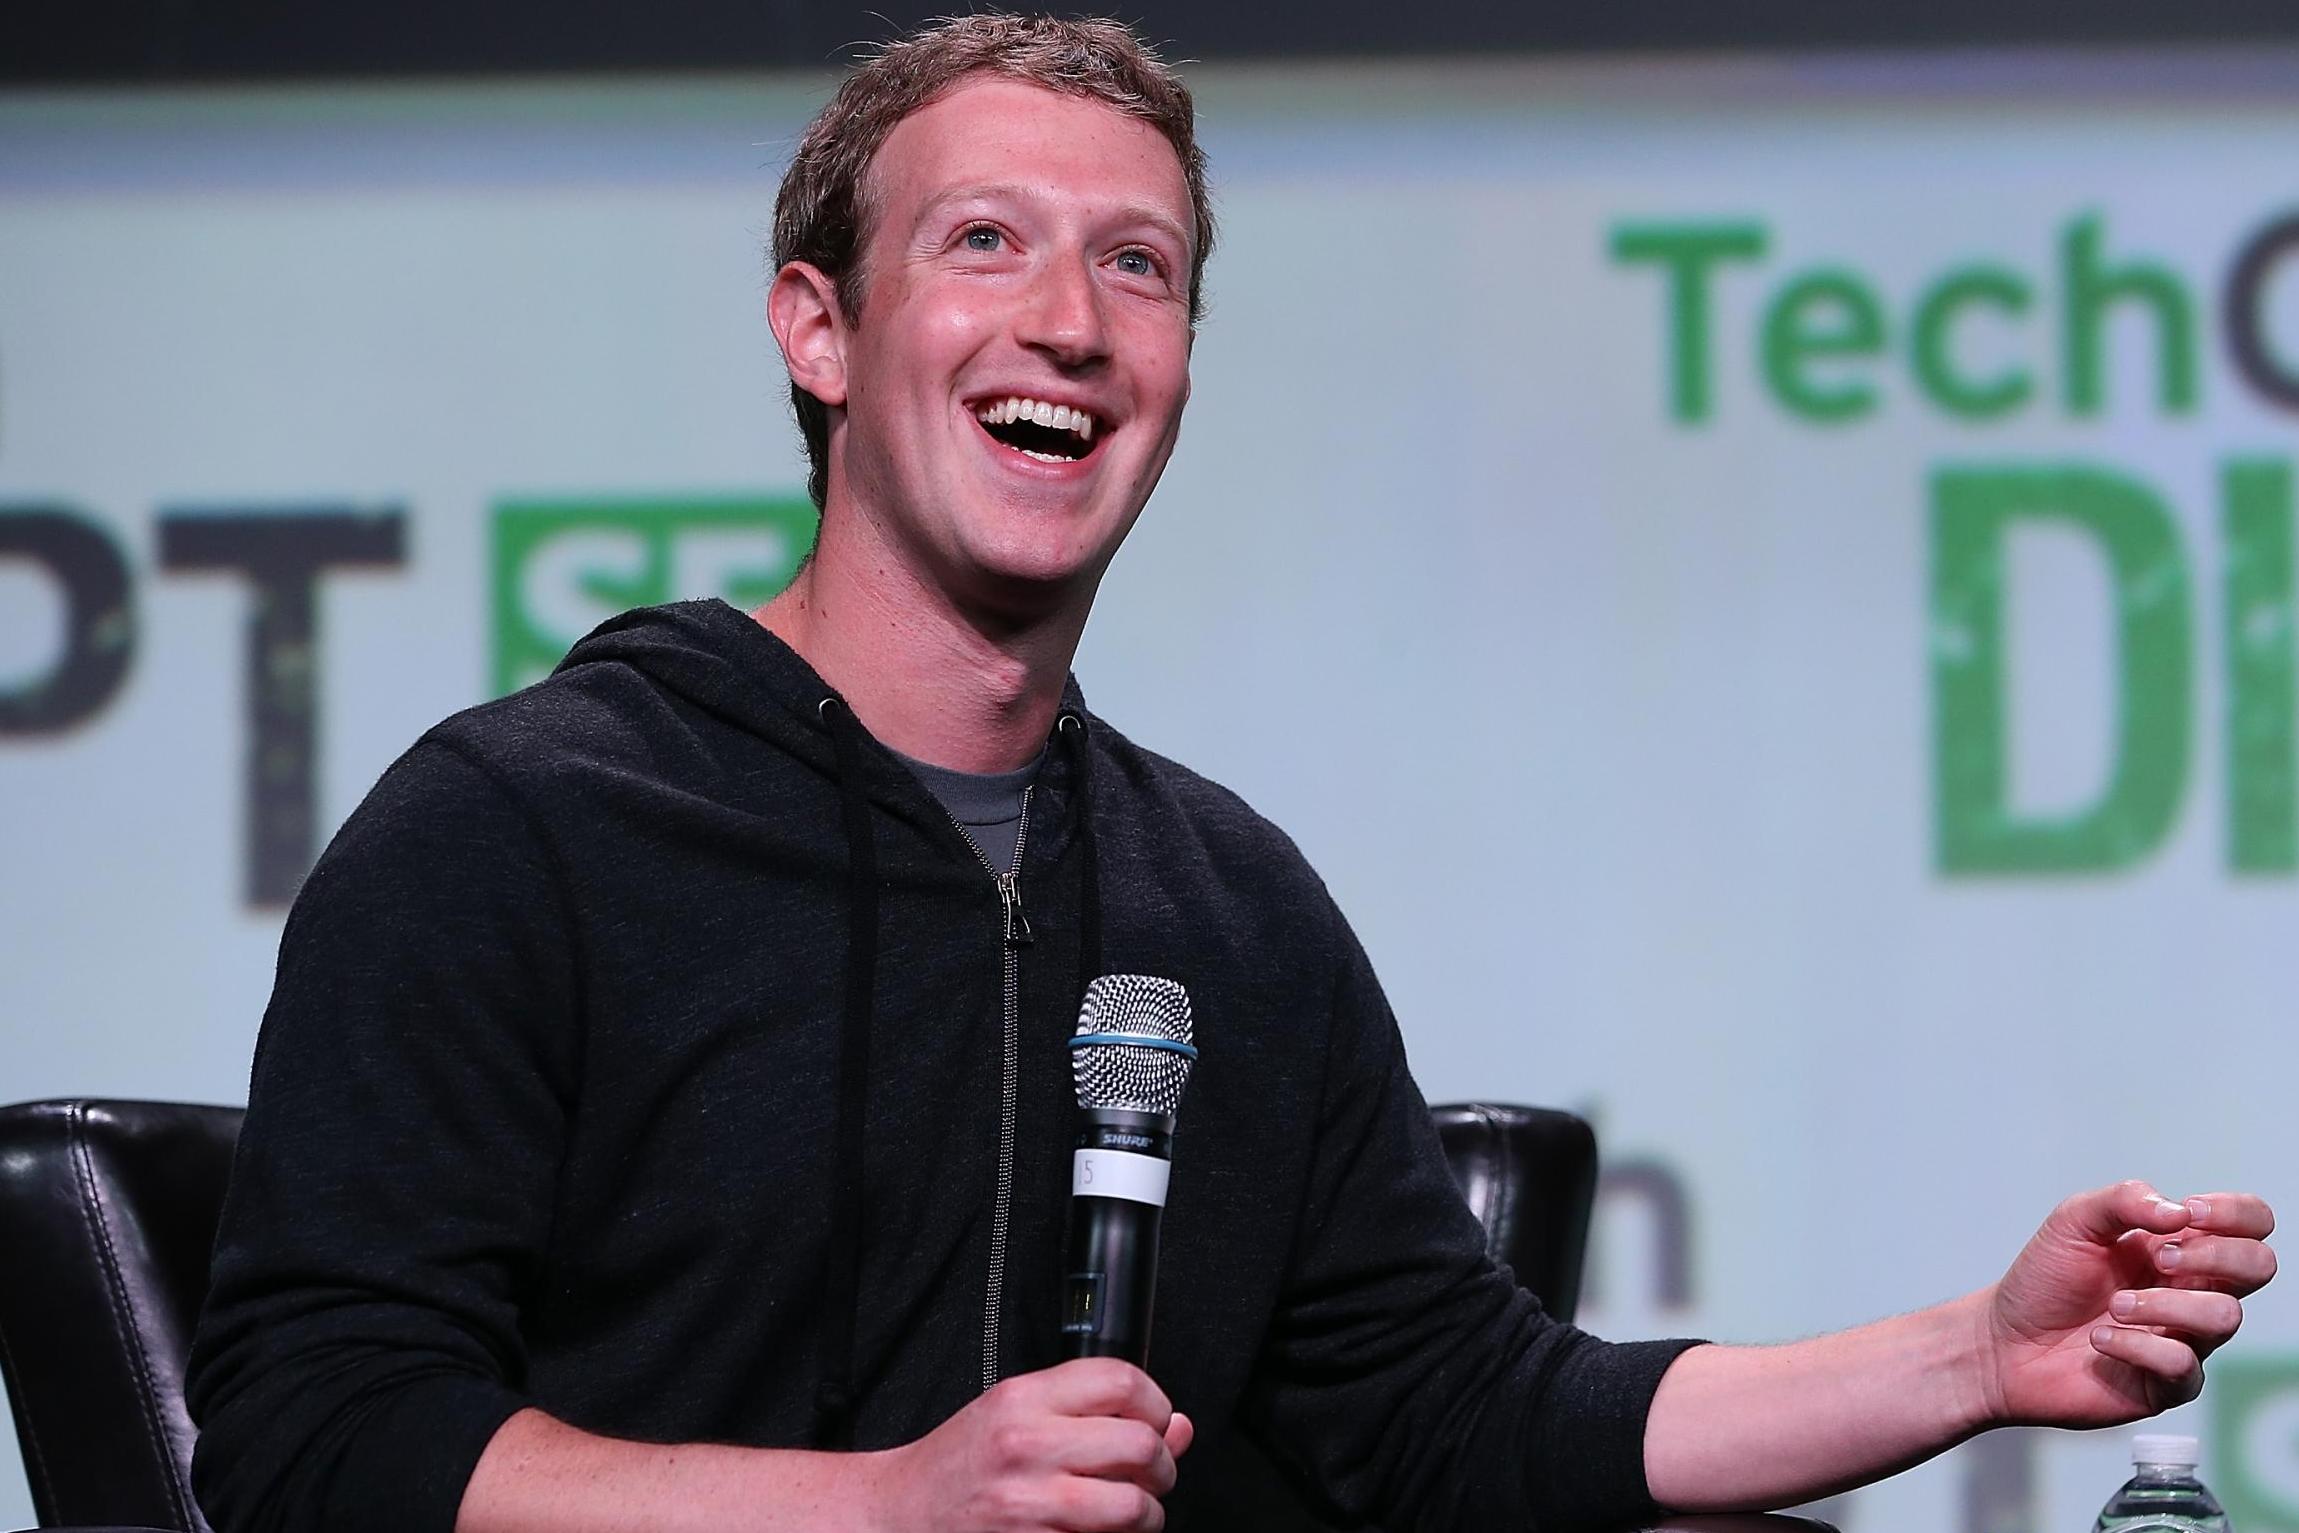 Picture: Facebook founder and CEO Mark Zuckerberg speaks during the 2013 TechCrunch Disrupt conference on September 11, 2013 in San Francisco, California.